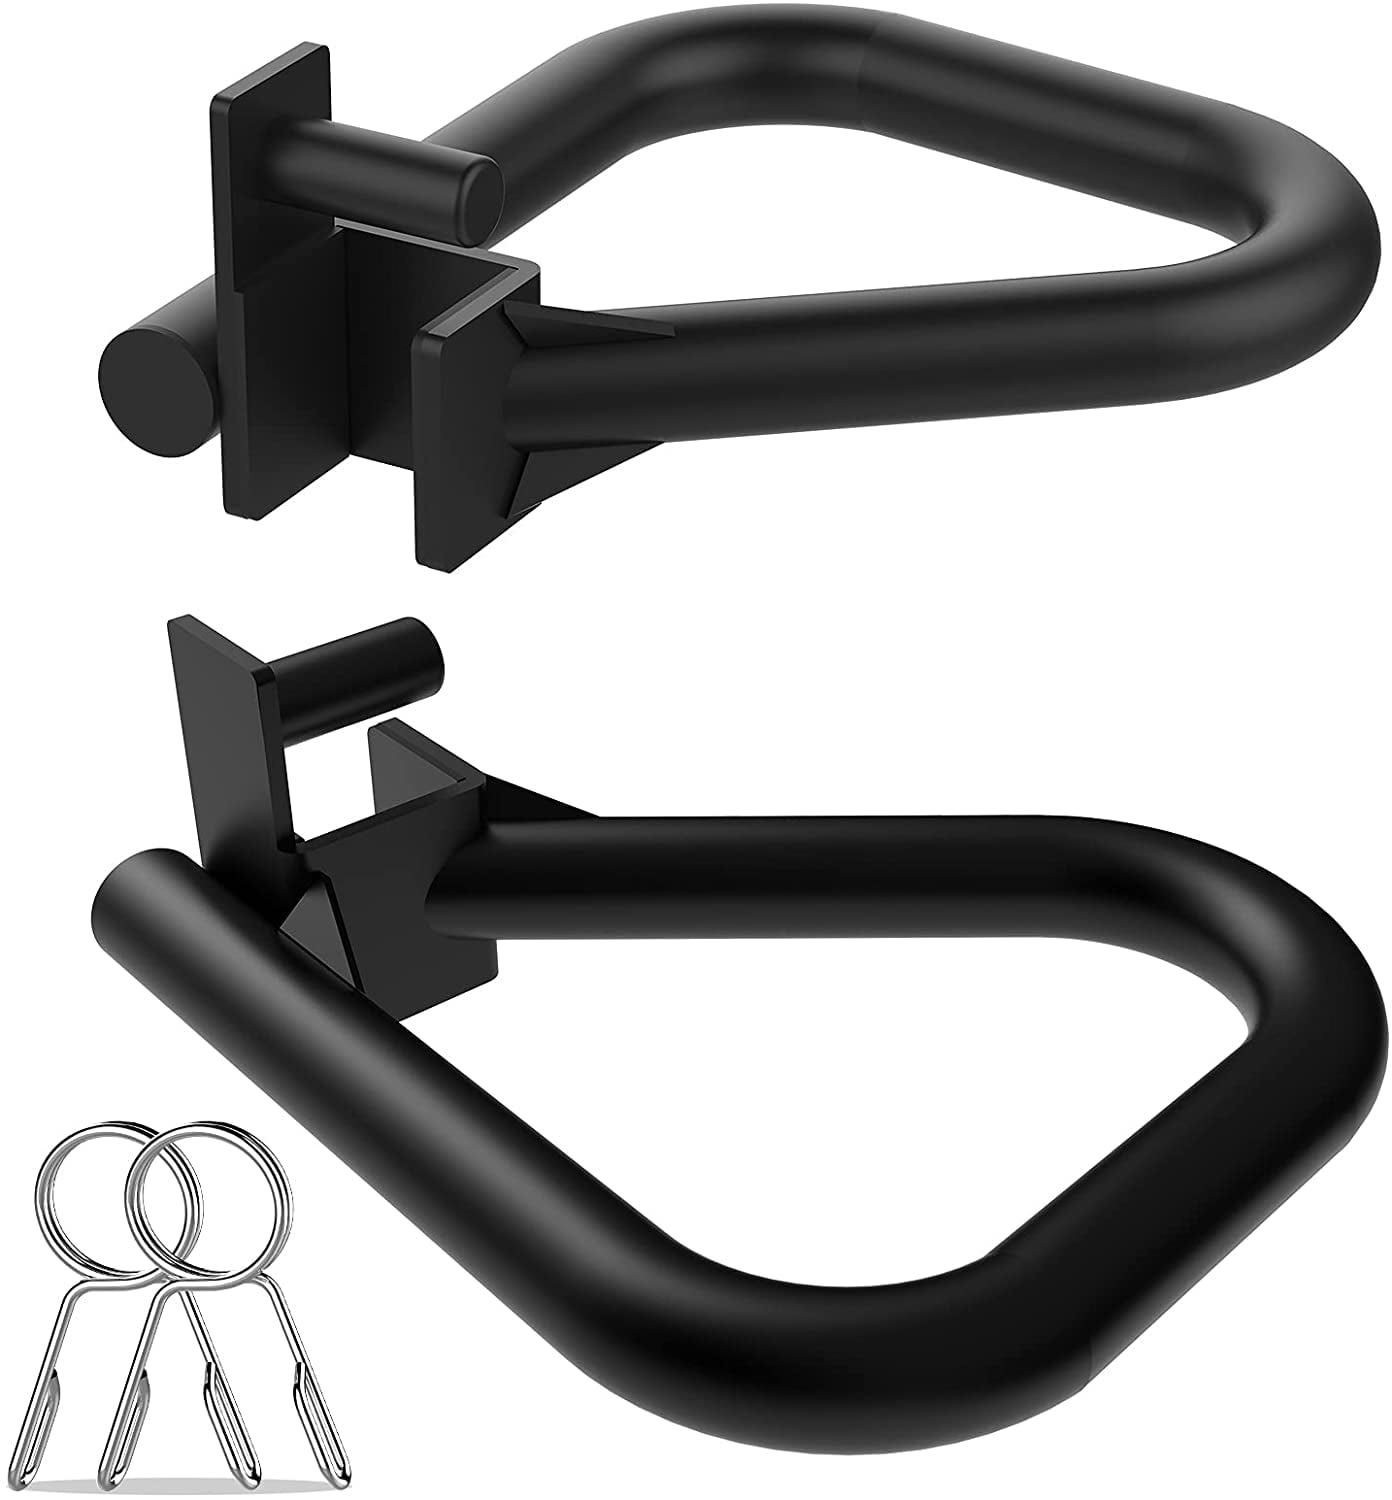 Fits 2 x 2 Tube with 1'' Hole Power Cages Balelinko Set of 2 Steel J-Hooks Bonus a Pair of Free Spring Clip Collars Rings J-Cup Barbell Holder Power Rack Attachment 